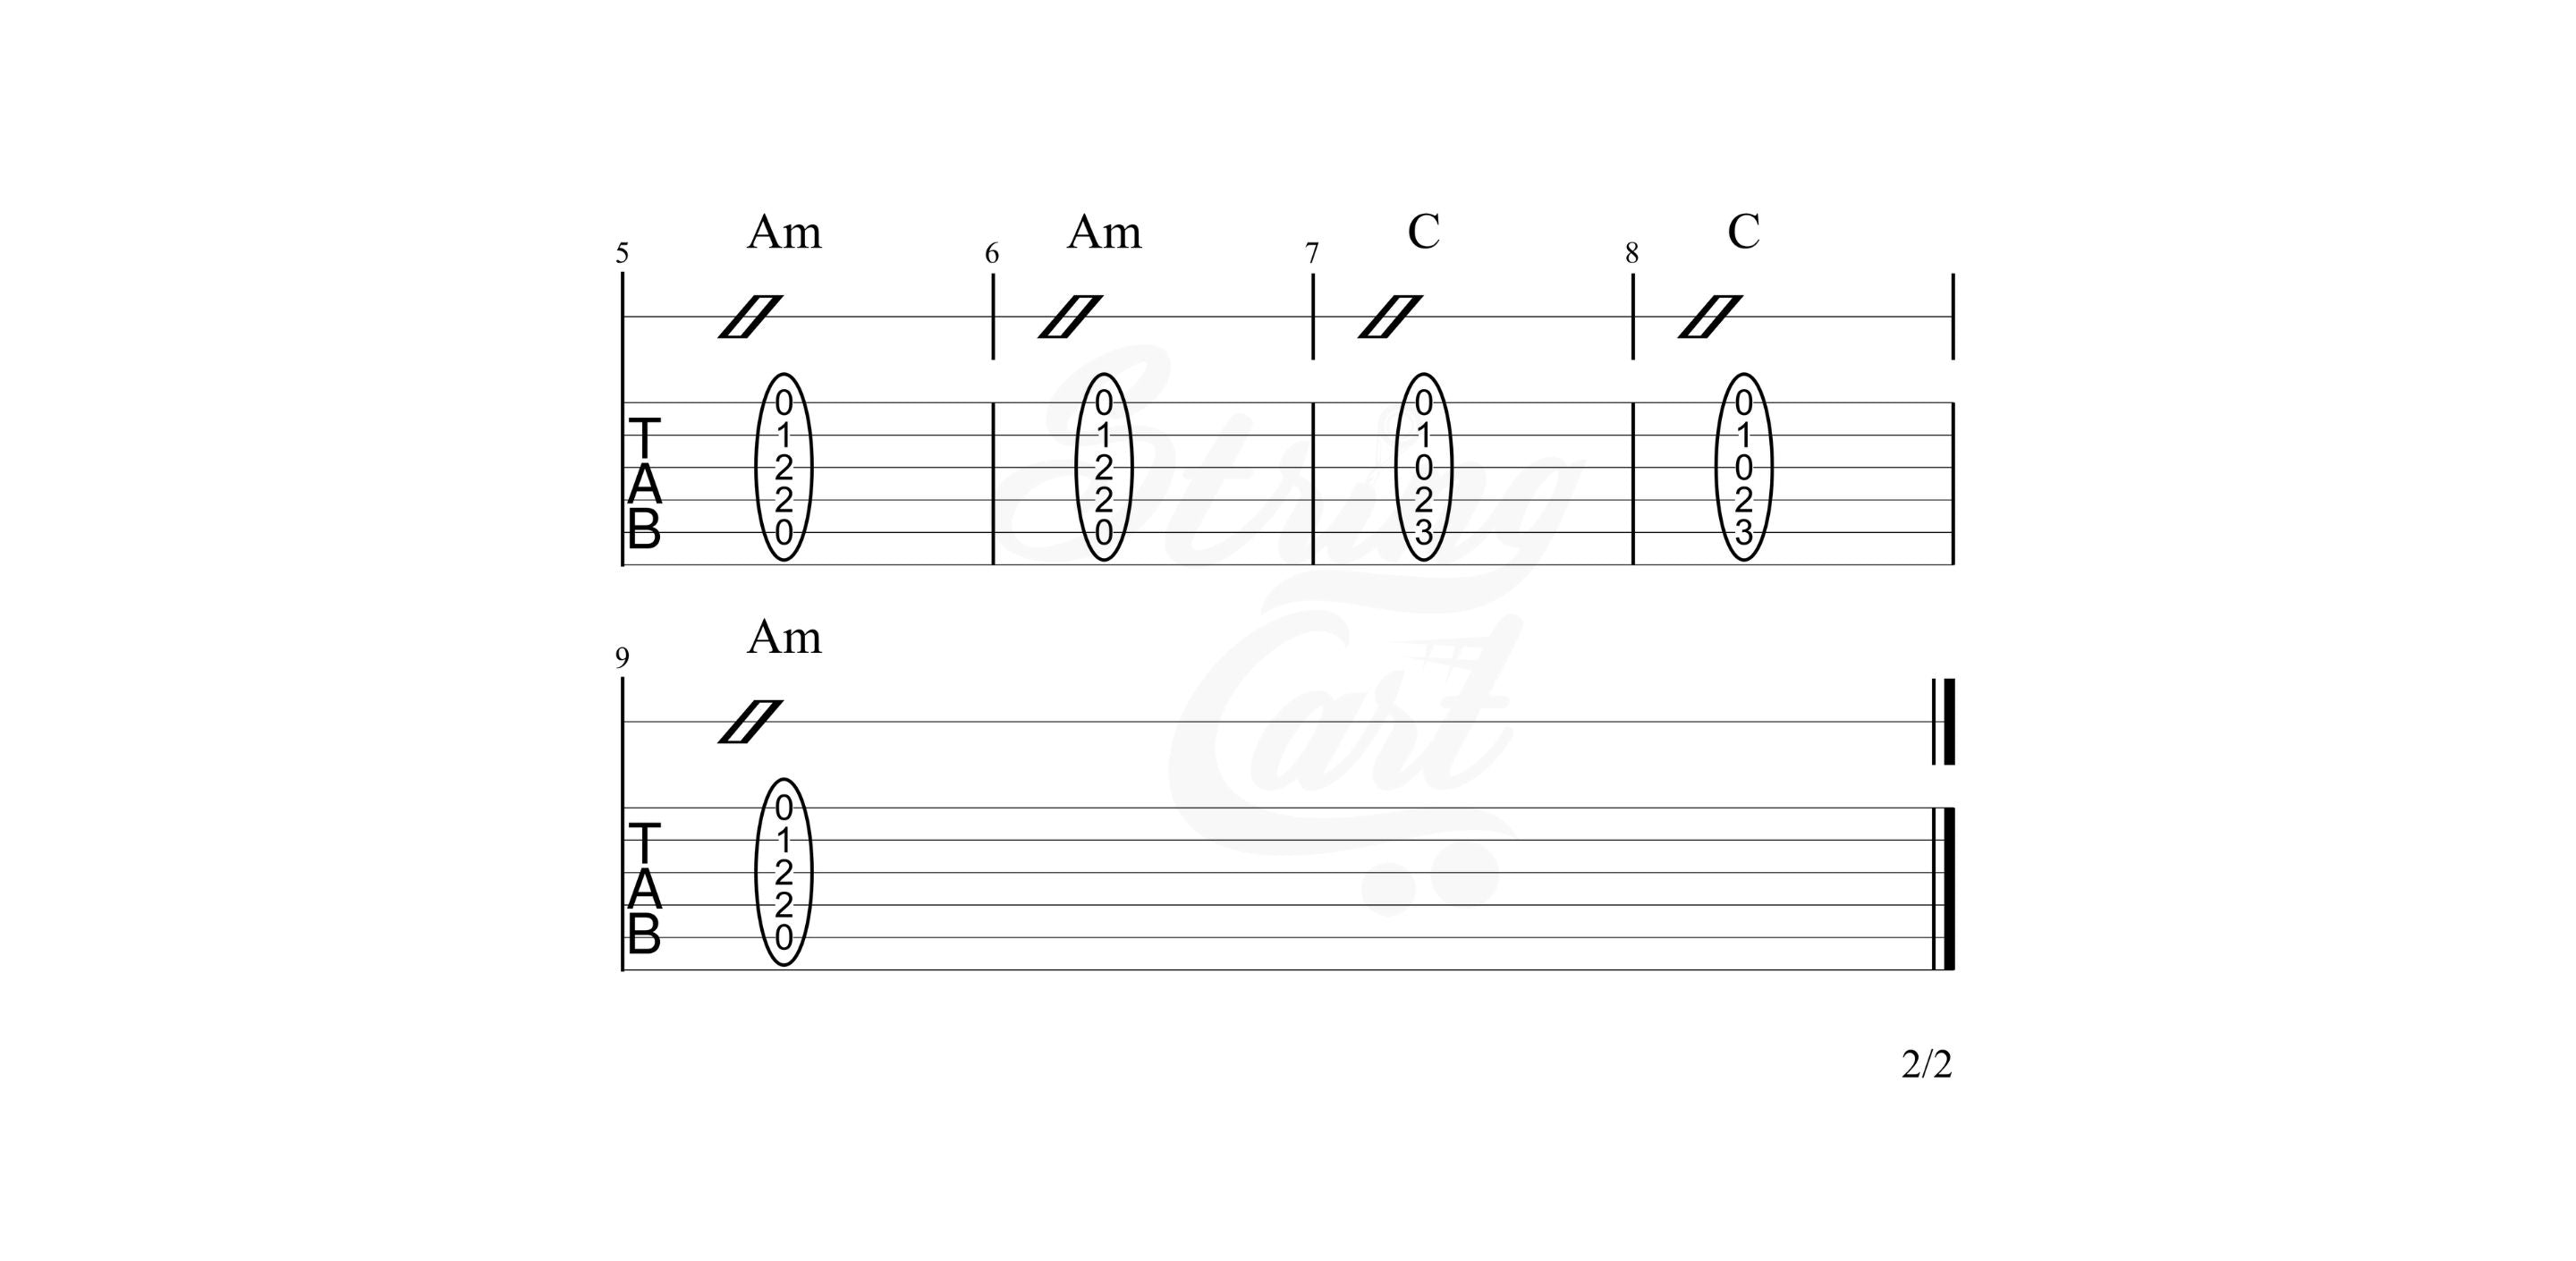 Play a particular chord for 4 bars and switch to a different chord at 5th Bar.